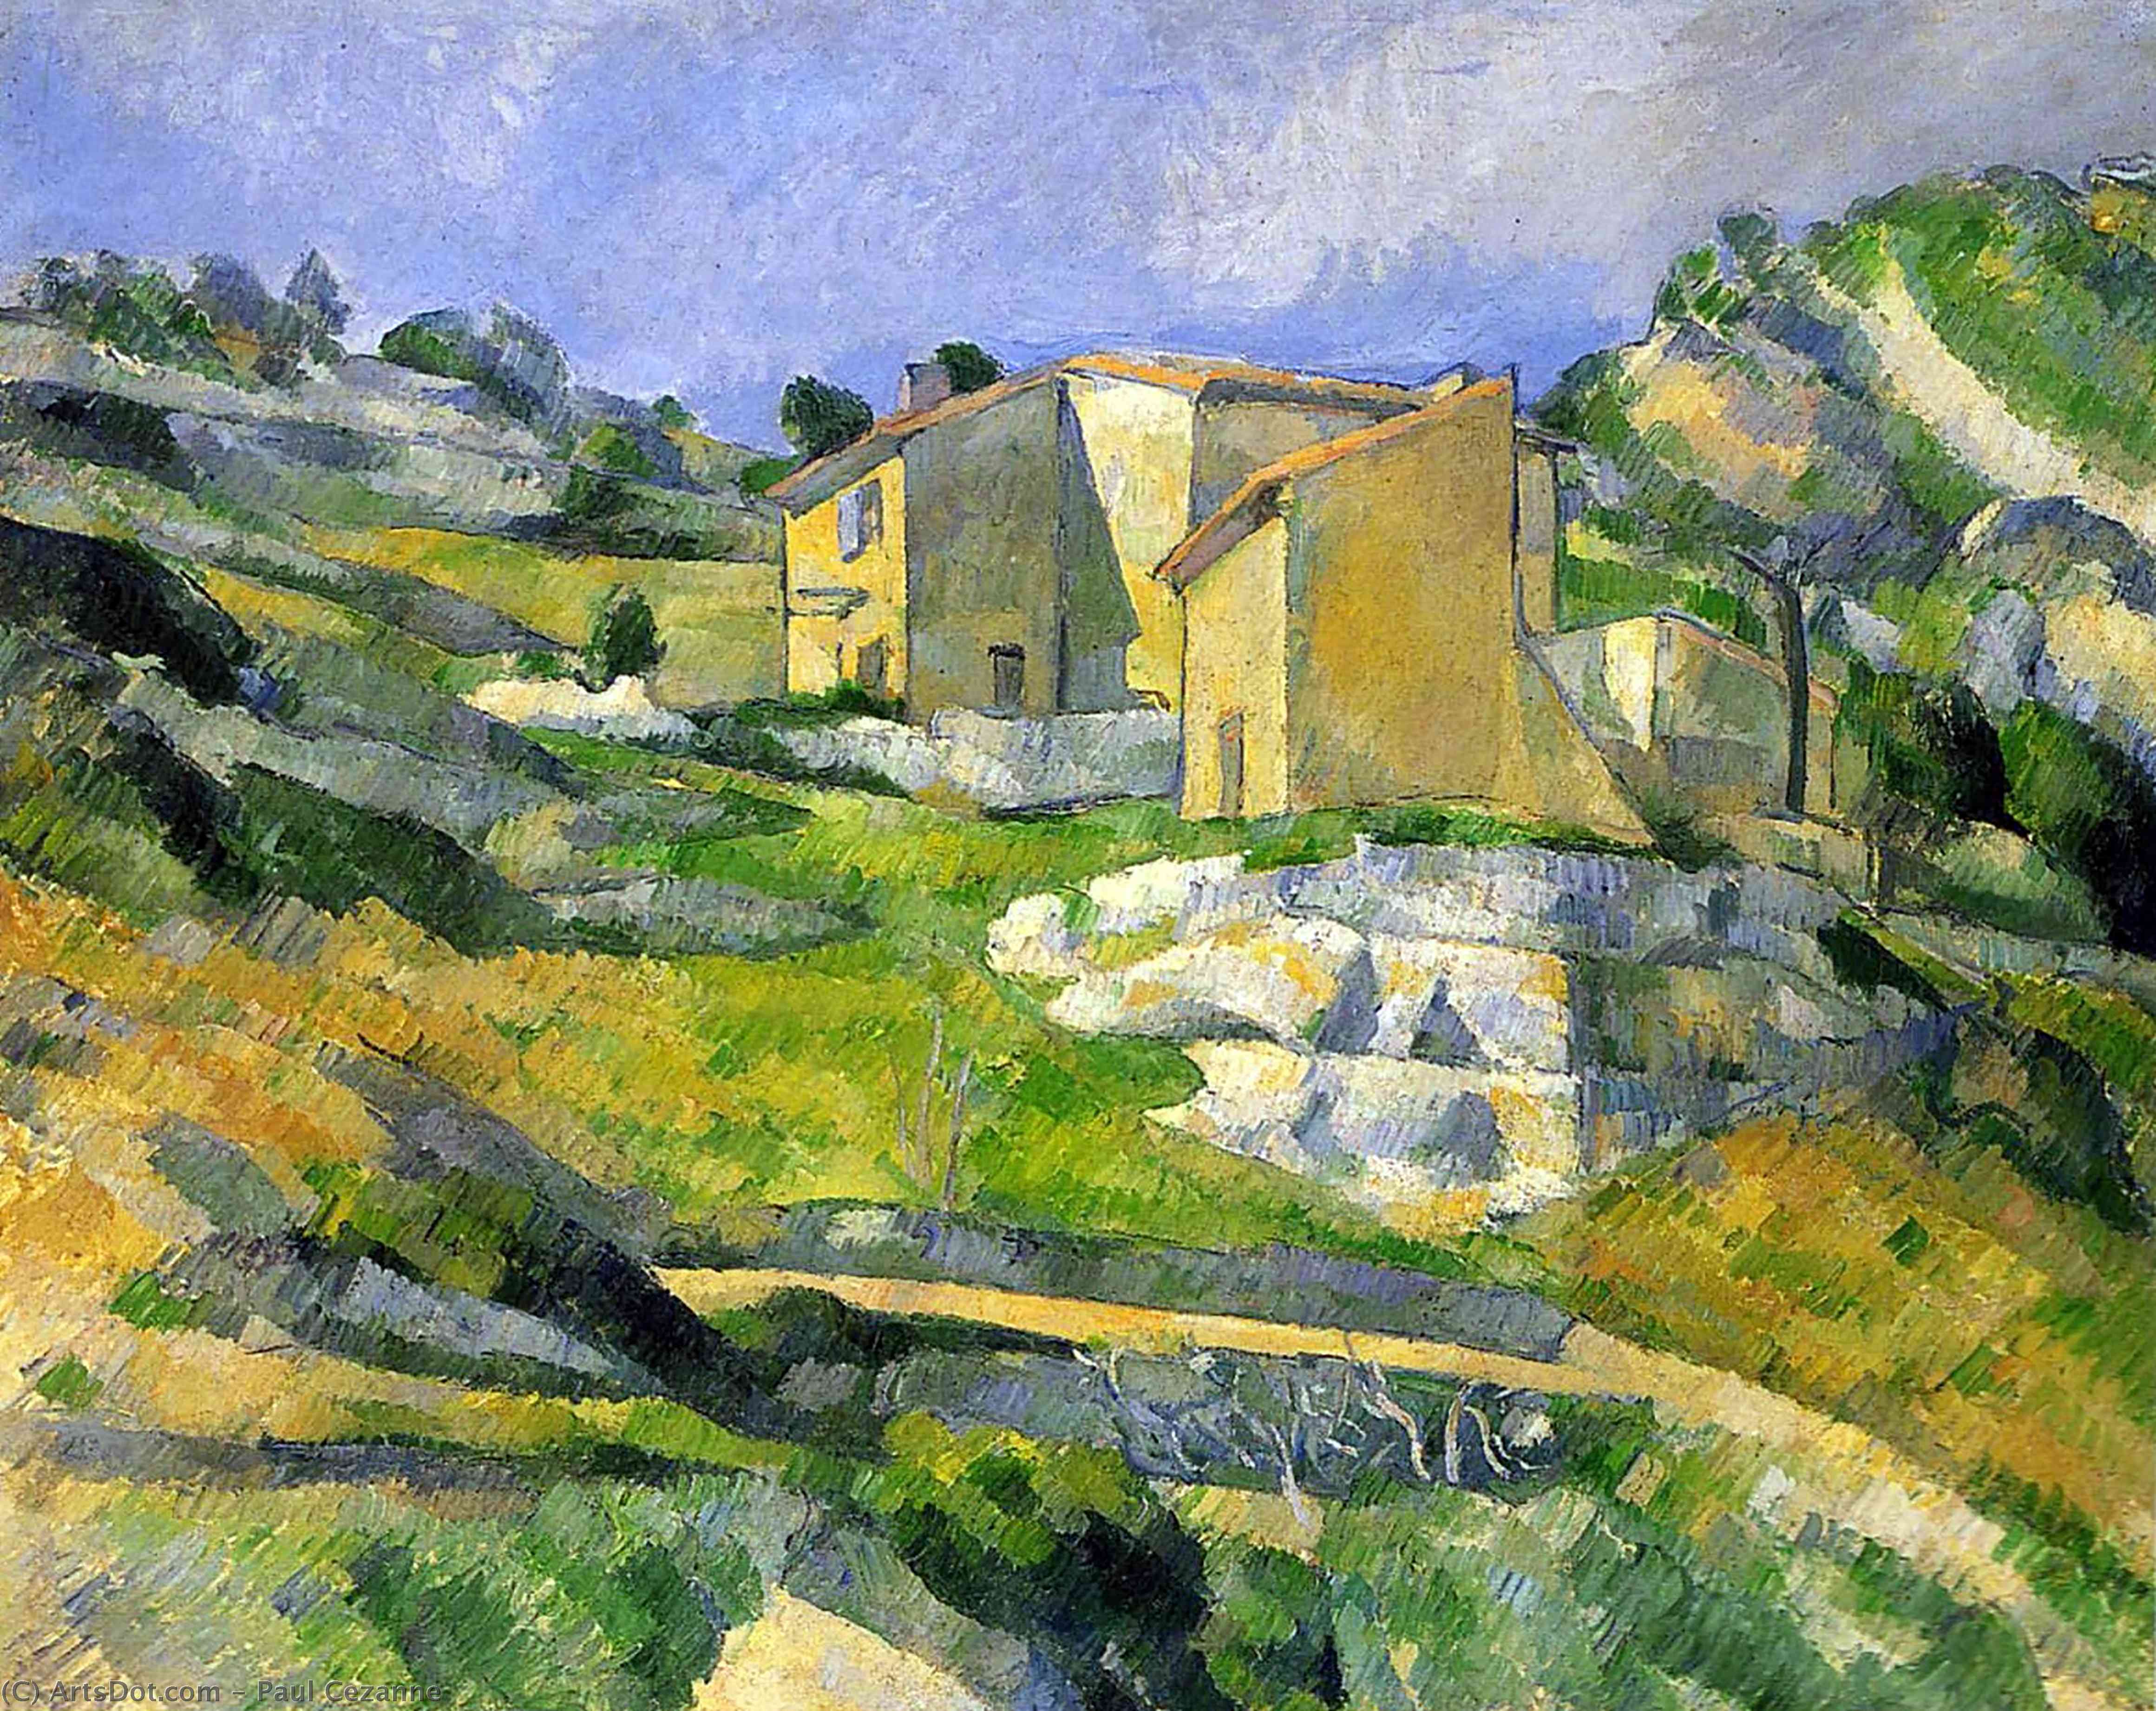 WikiOO.org - 백과 사전 - 회화, 삽화 Paul Cezanne - Houses in Provence - the Riaux Valley near L'Estaque